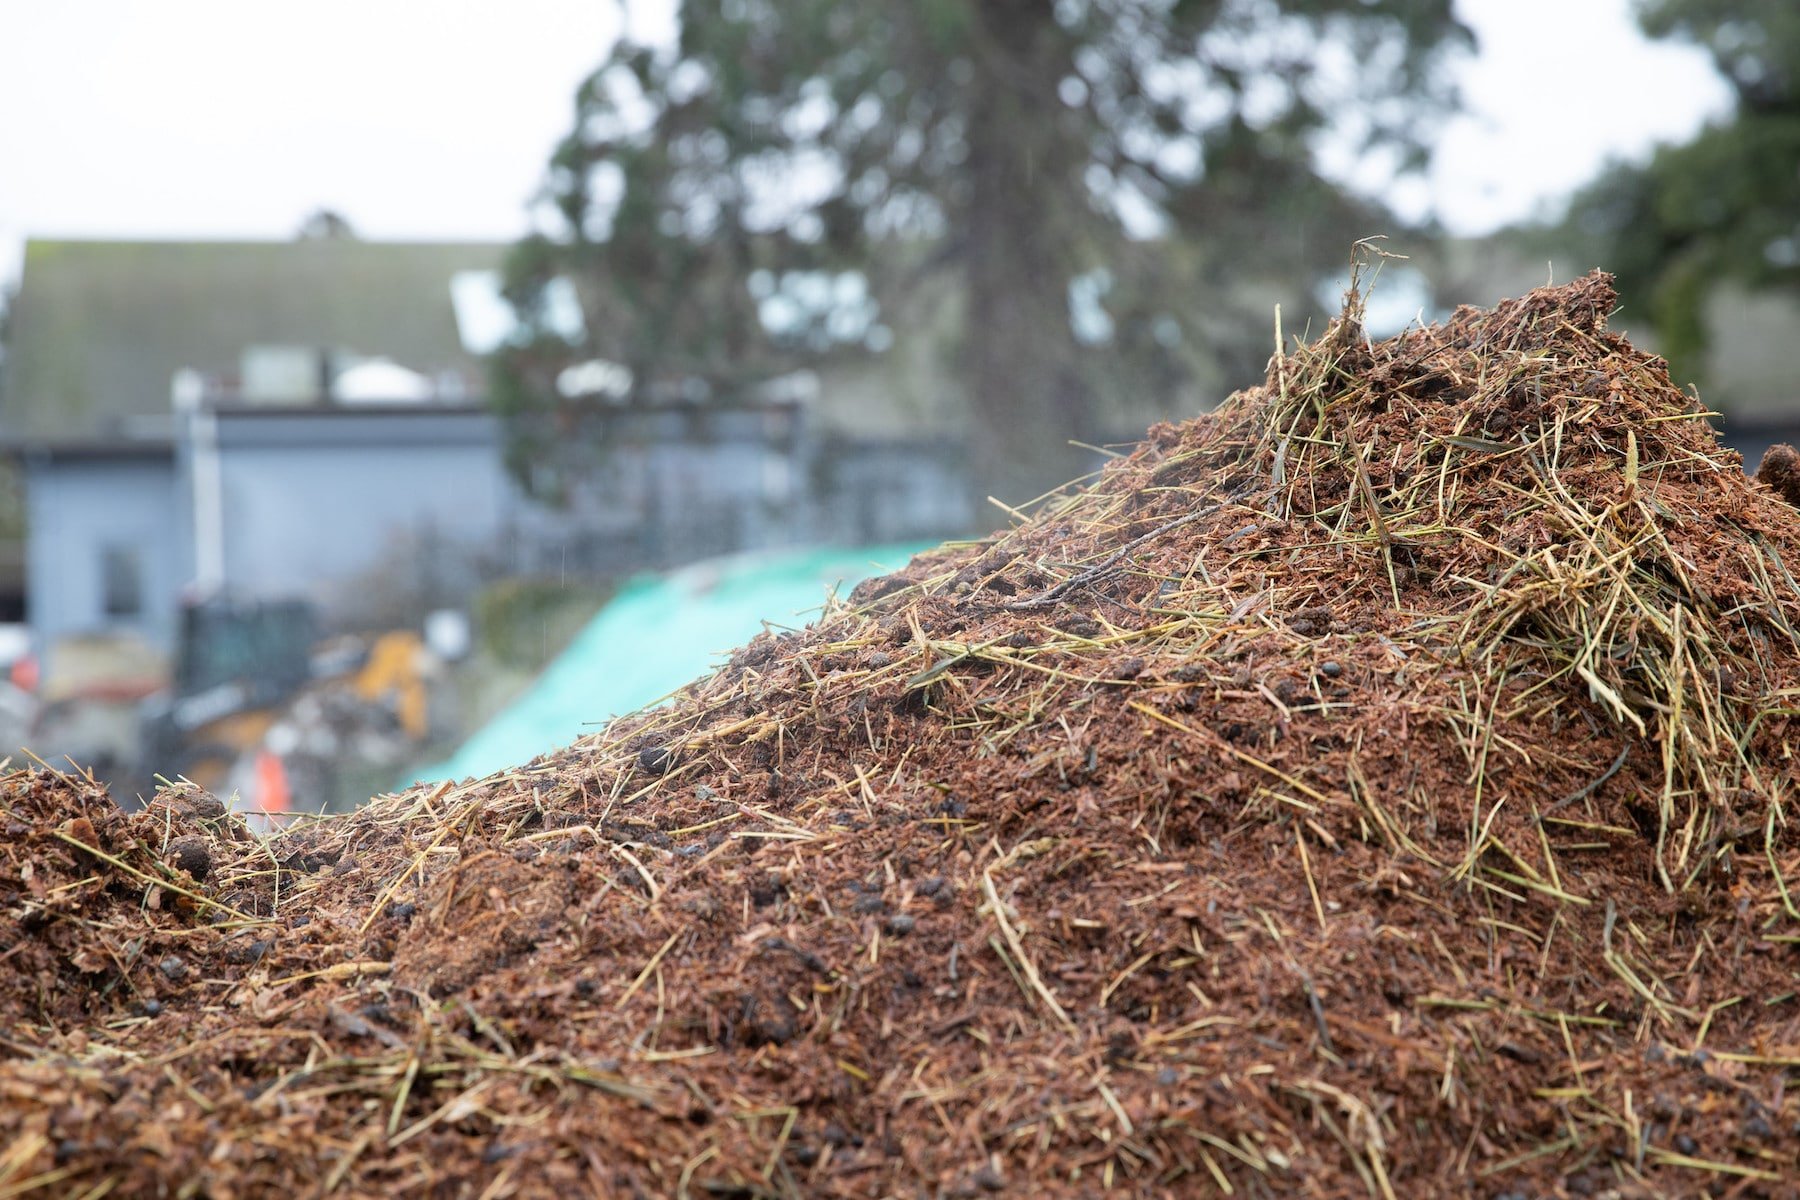 Dung Deal: Zoos Offer Animal Compost for Lawns, Gardens - Lawnstarter